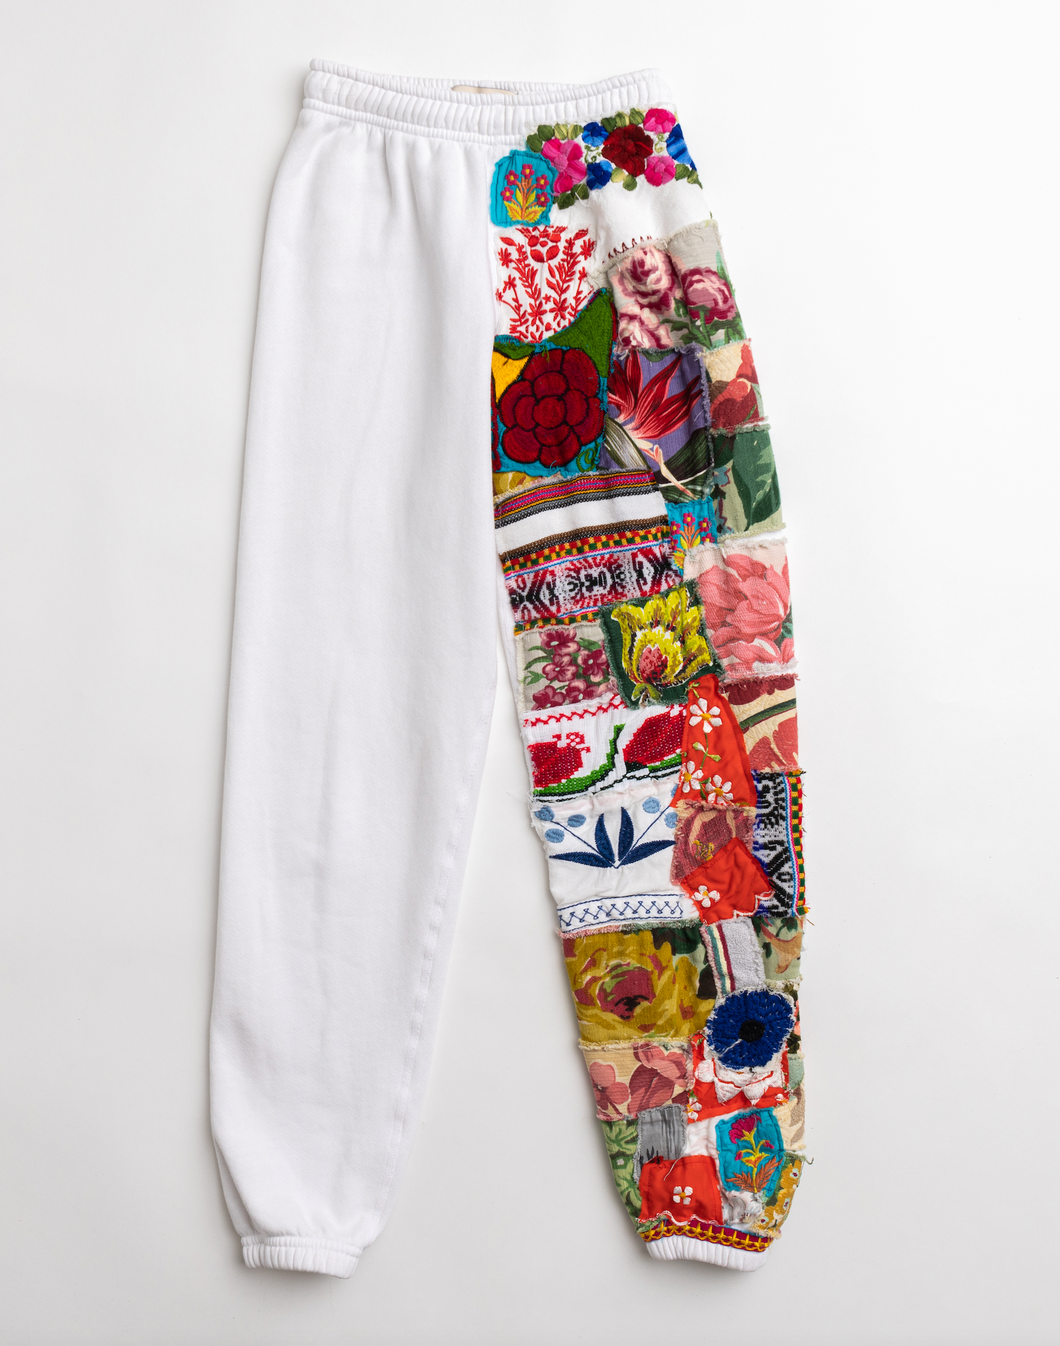 RILEY VINTAGE Totally Patched Up White Sweatpants PREORDER SHIPS WITHIN 2 WEEKS